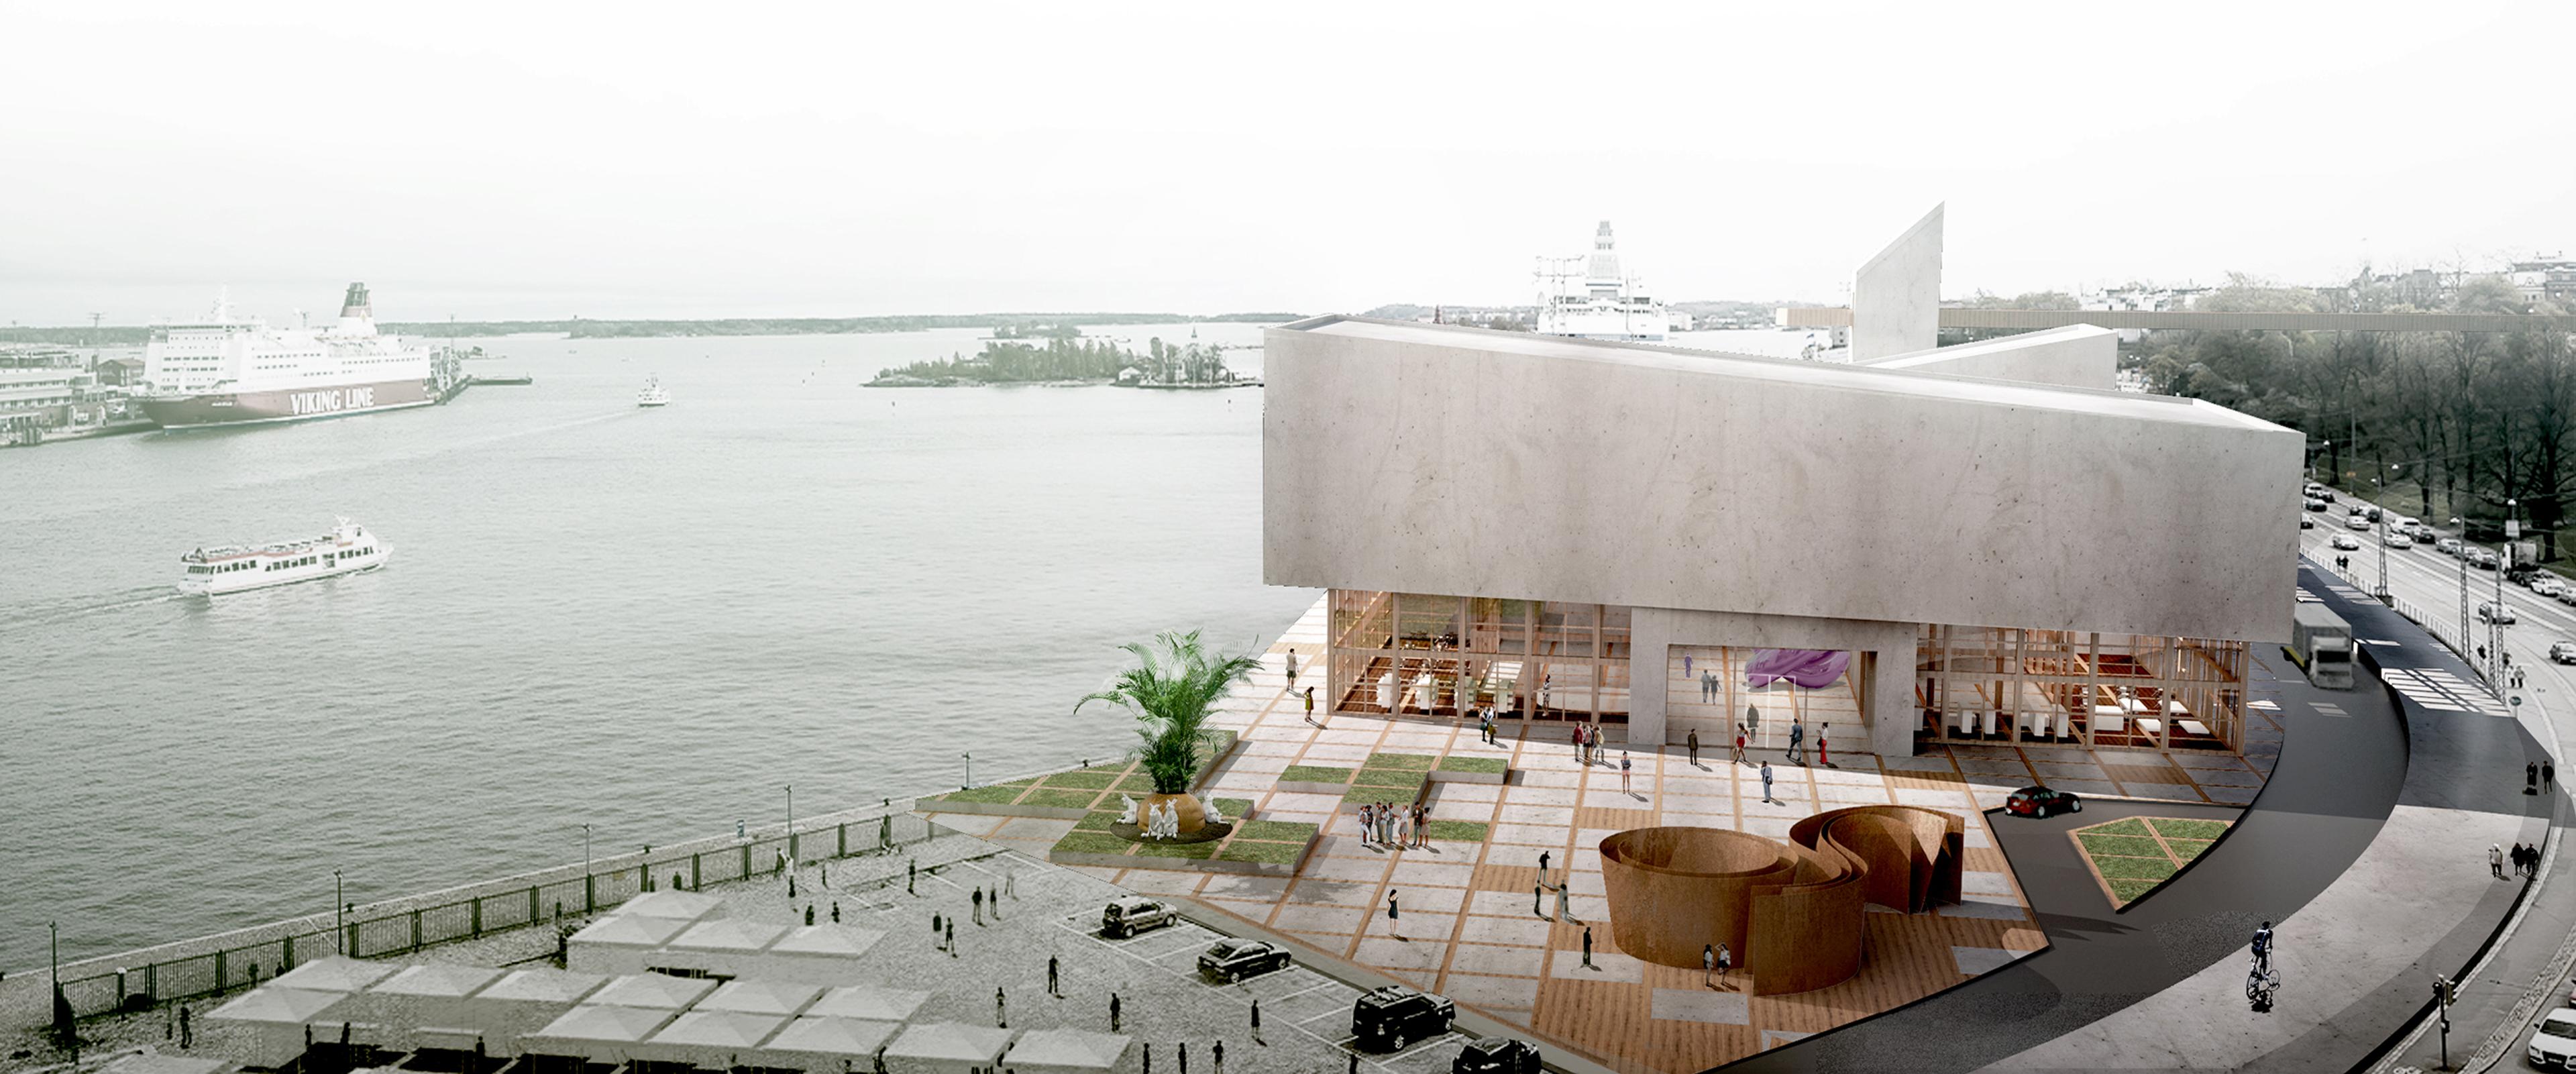 Architectural rendering of a museum structure next to the harbour front and road